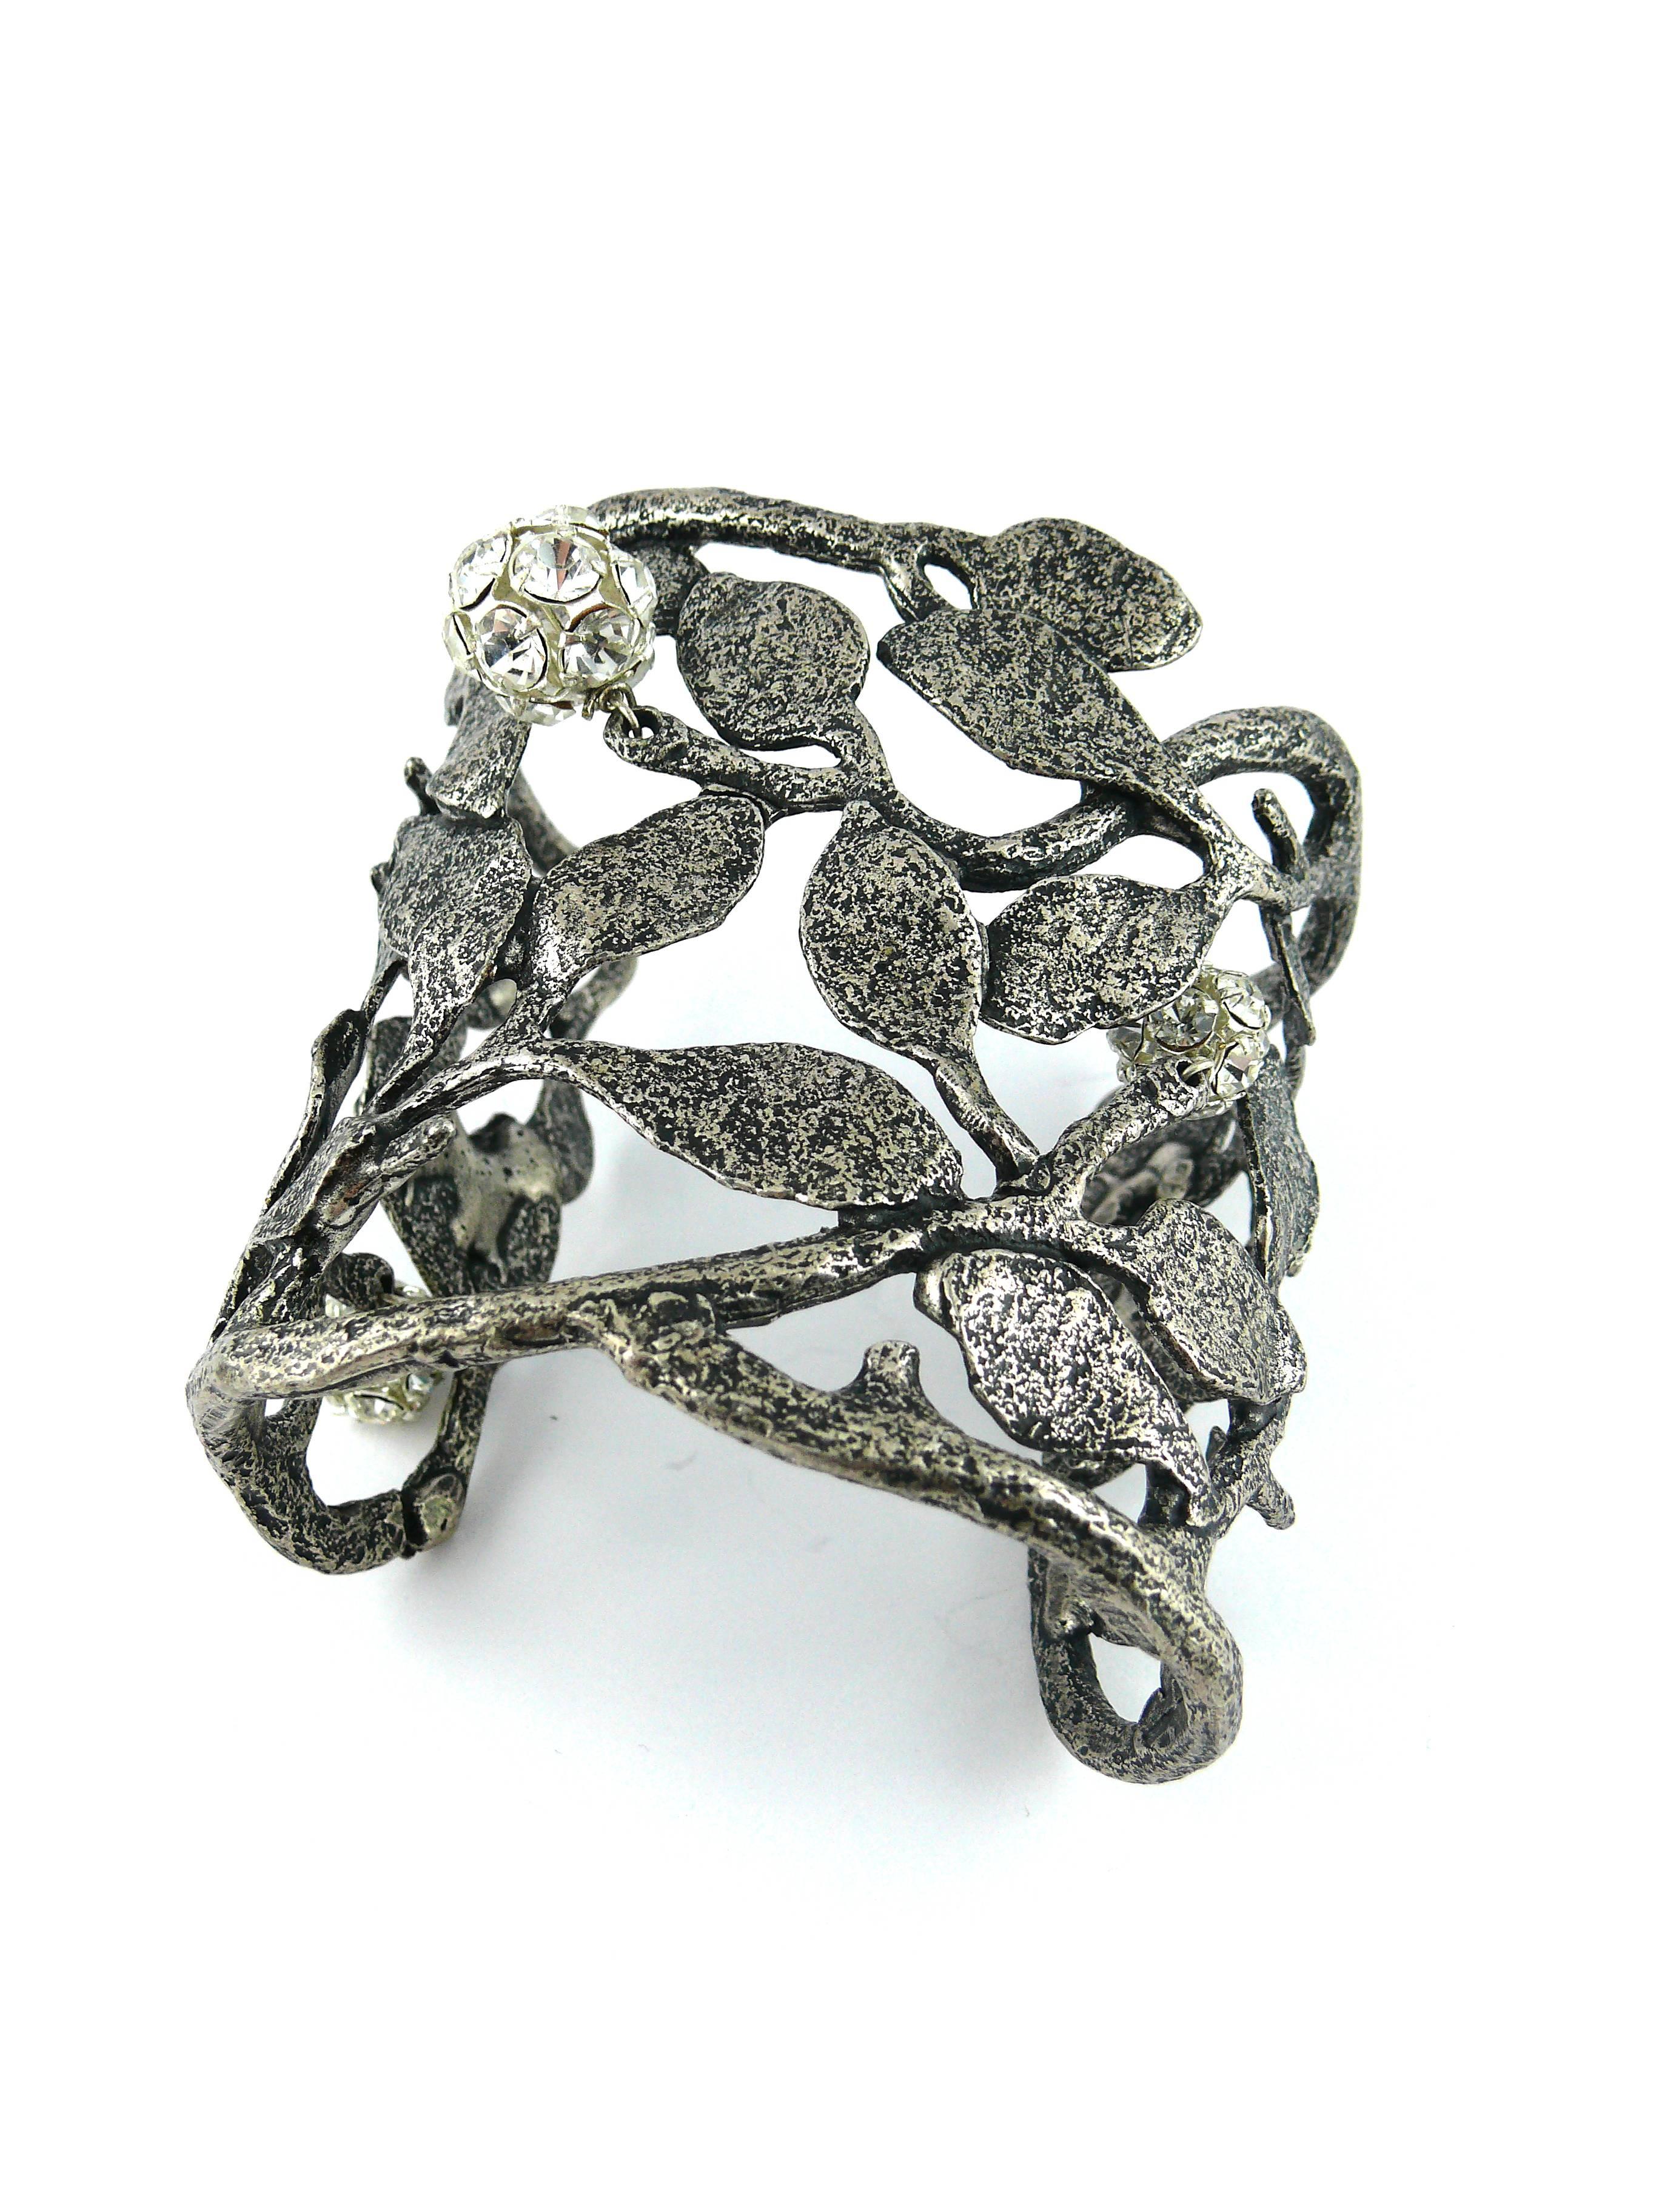 PATRICK RETIF (1958-1991) vintage rare silver tone with antique patina openwork cuff bracelet featuring a sculptural foliage design embellished with 3 crystal balls.

Superb quality for this stunning bracelet created by French artist PATRICK